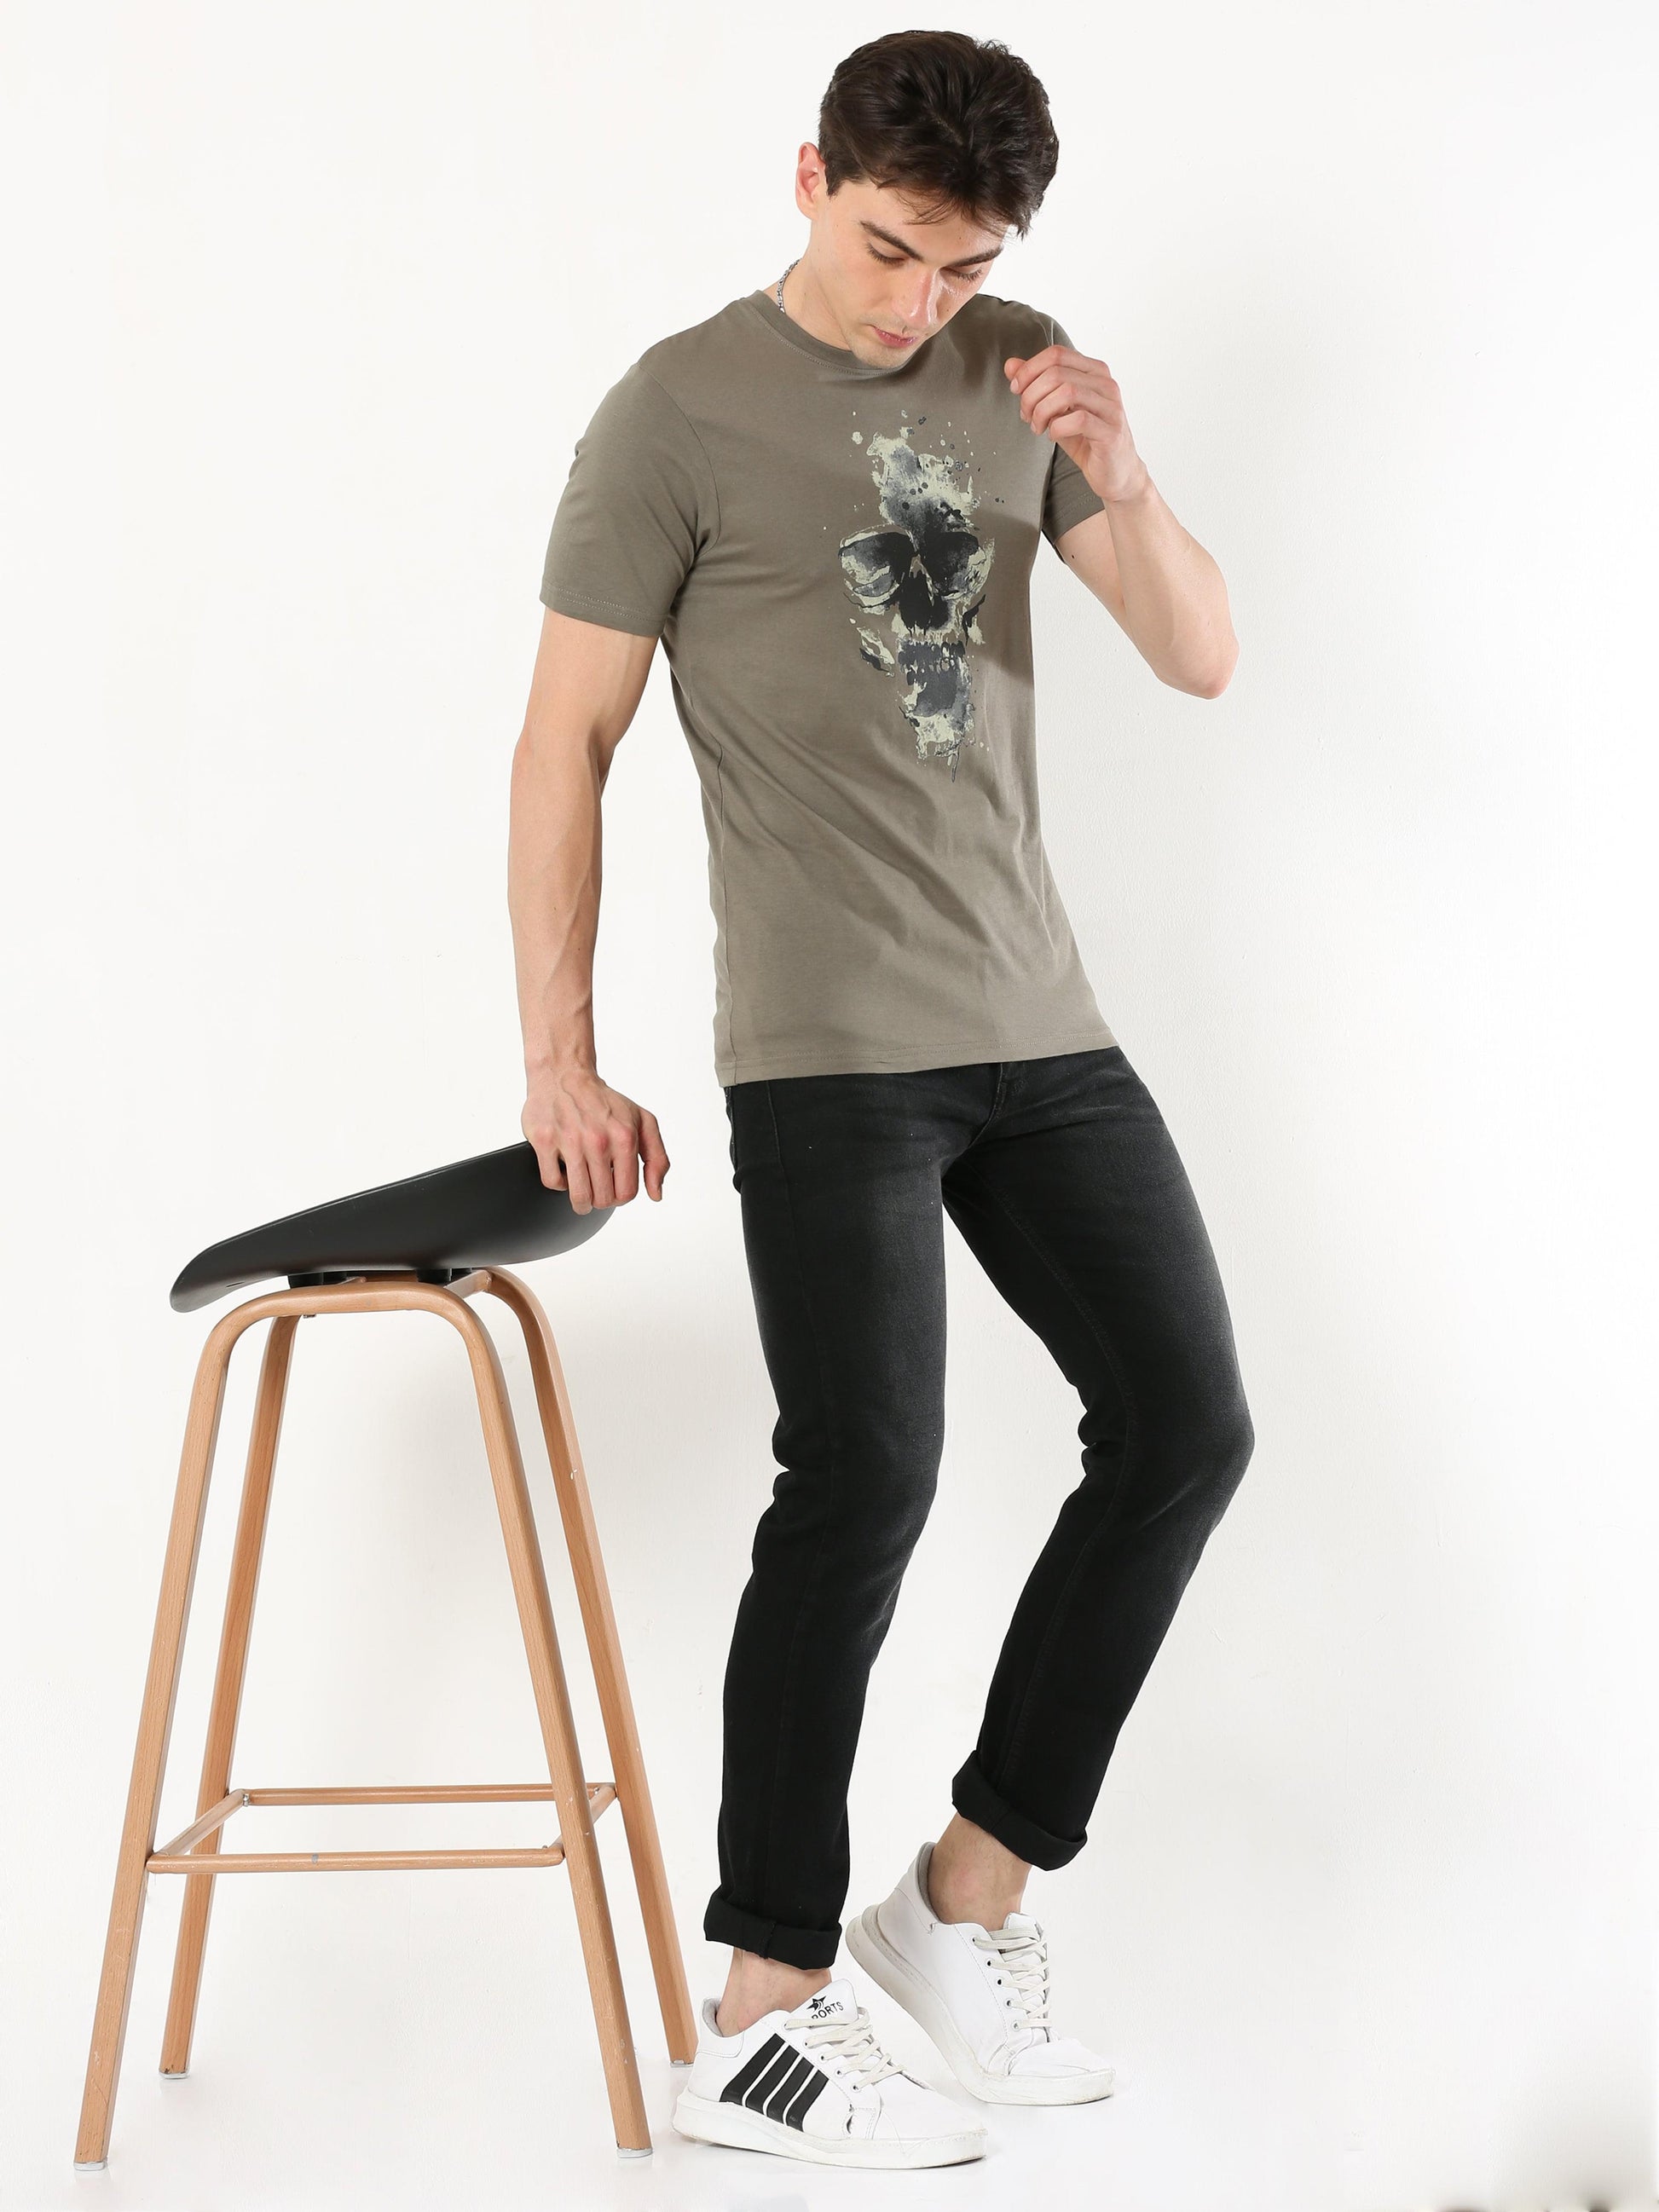 Men's casual T-Shirt - Ghost Rider